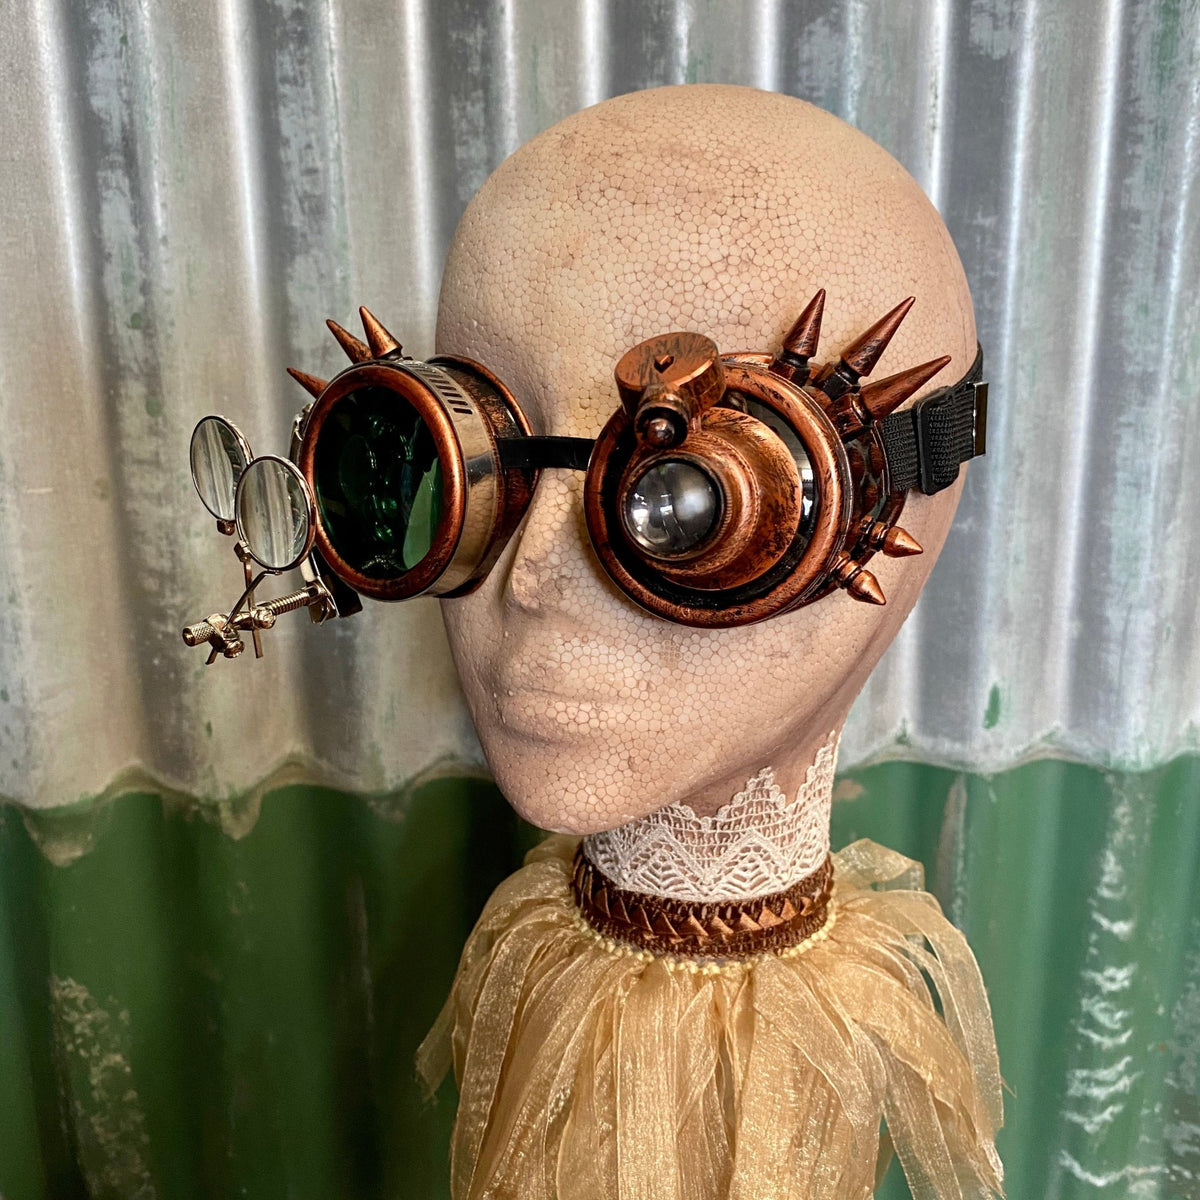 Steampunk Magnifying Goggles FOR SALE by ArcheDeKatze on DeviantArt